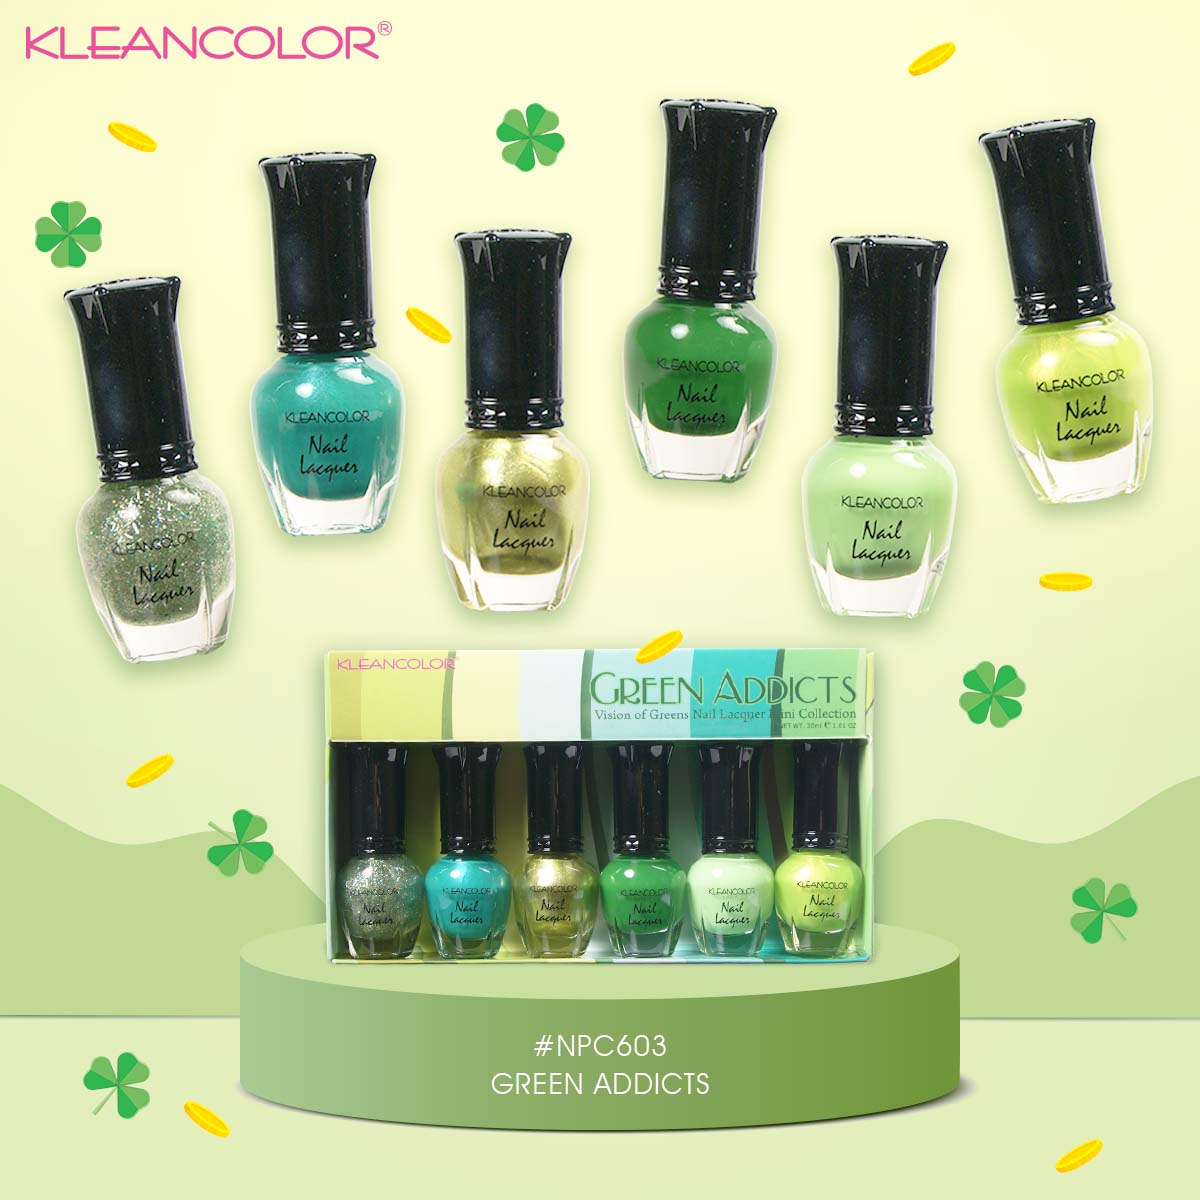 Feeling a little green? Like this pic for good luck.🍀☘💚
-
#KLEANCOLOR #greennailpolish #nailpolish #naillacquer #StPatsDay #HappyStPatricksDay #Makeup #Beauty #Cosmetics
-
kleancolor.com/products/green…